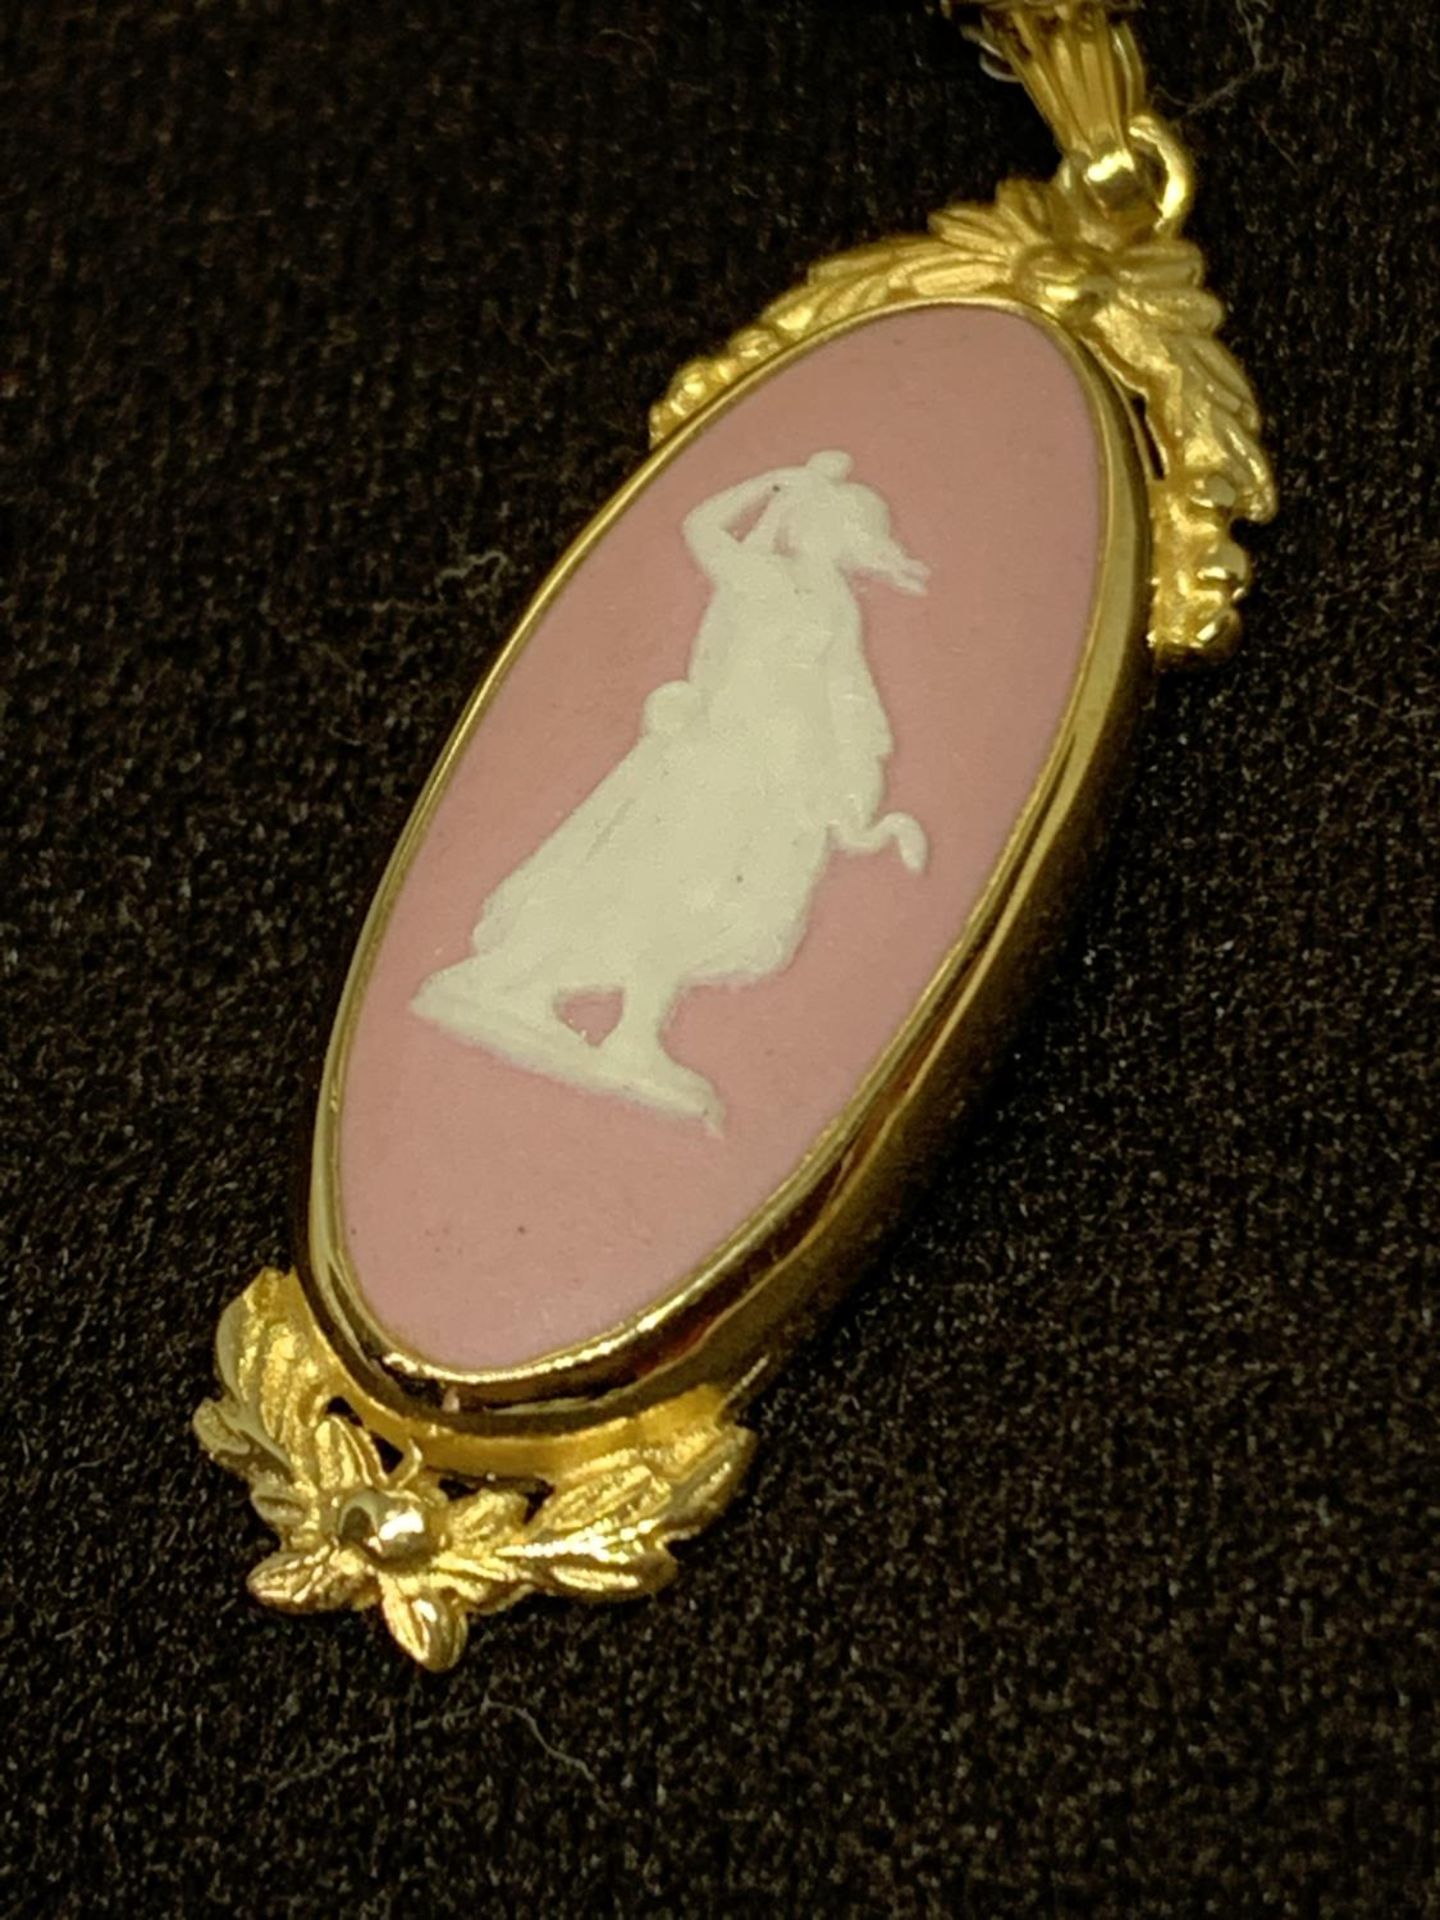 A GOLD PLATED STERLING SILVER PINK WEDGWOOD JASPERWARE PENDANT IN A PRESENTATION BOX - Image 2 of 3